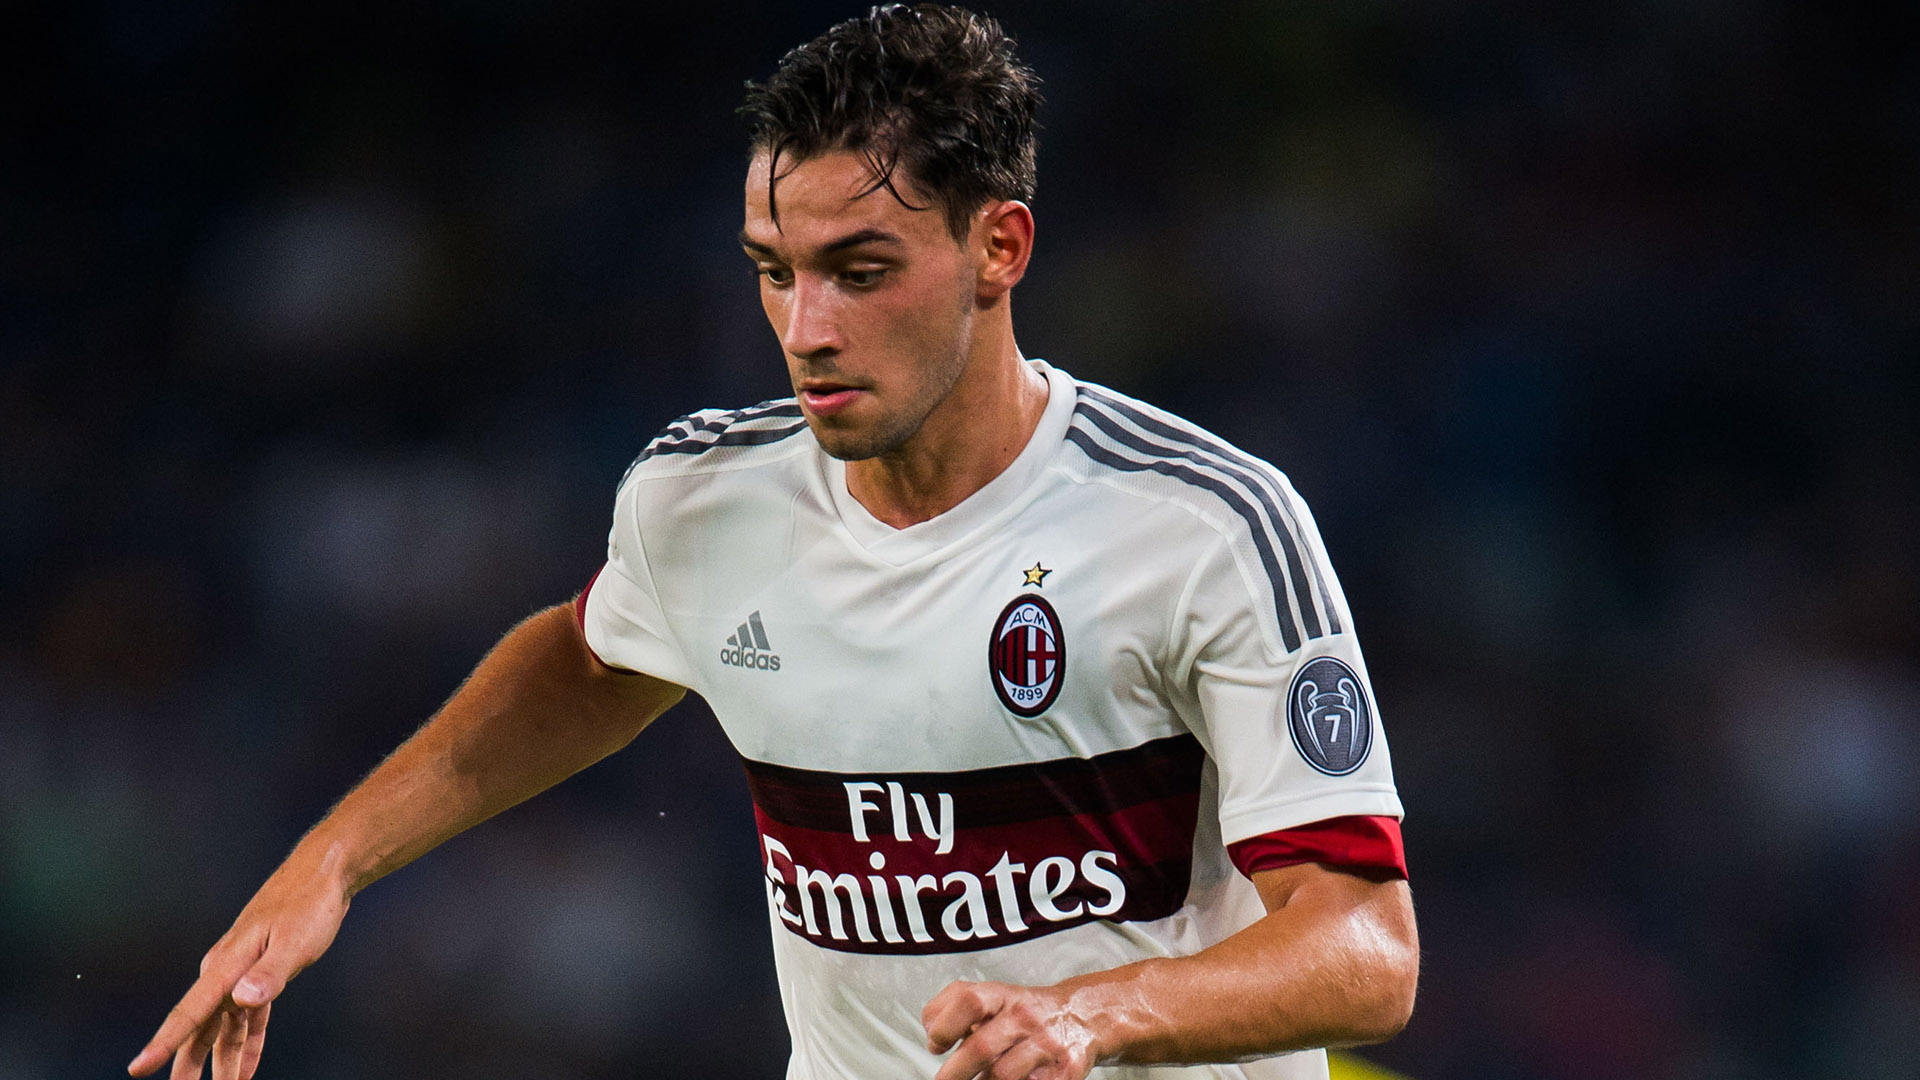 SHENZHEN, CHINA - JULY 25:  Mattia De Sciglio of AC Milan in action during the AC Milan vs FC Internacionale as part of the International Champions Cup 2015 at the looks onnggang Stadium on July 25, 2015 in Shenzhen, China.  (Photo by Aitor Alcalde/Getty Images)